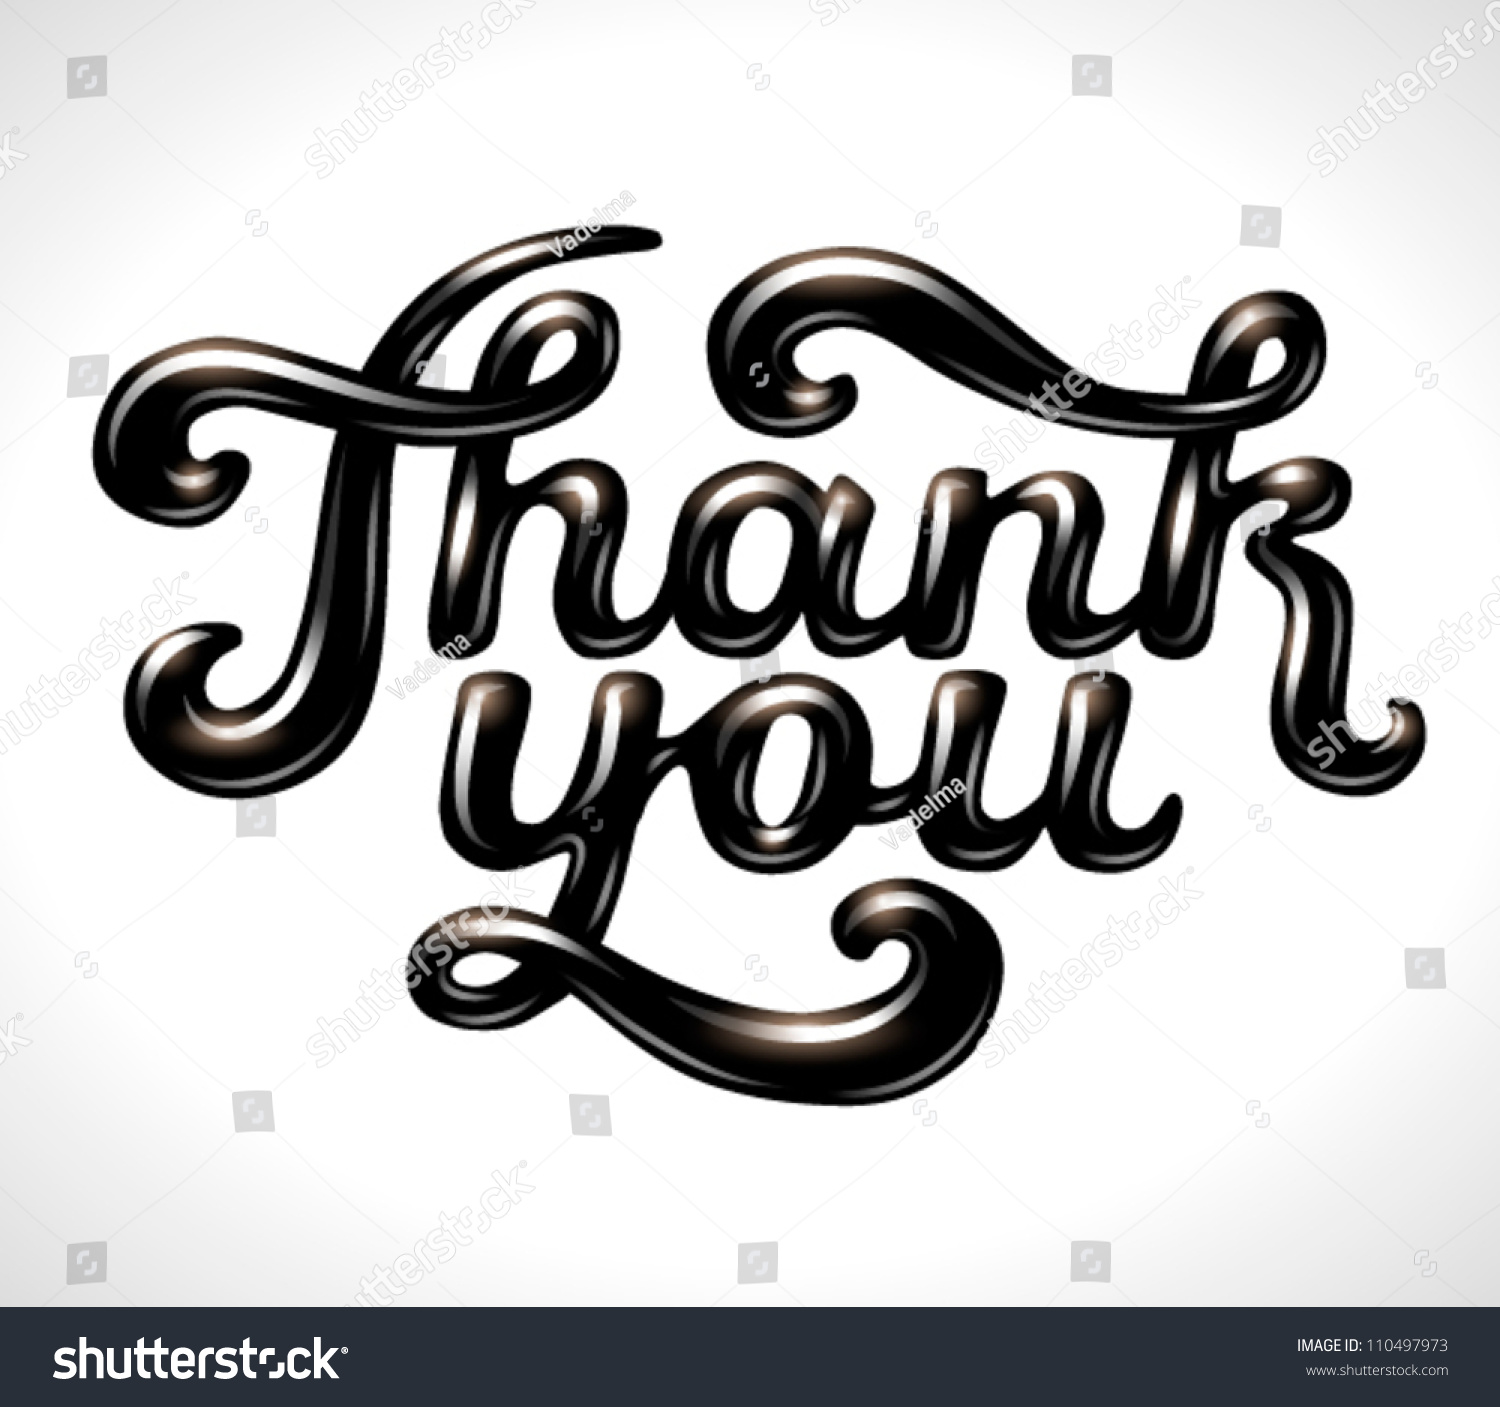 Thank You In Stylish Font